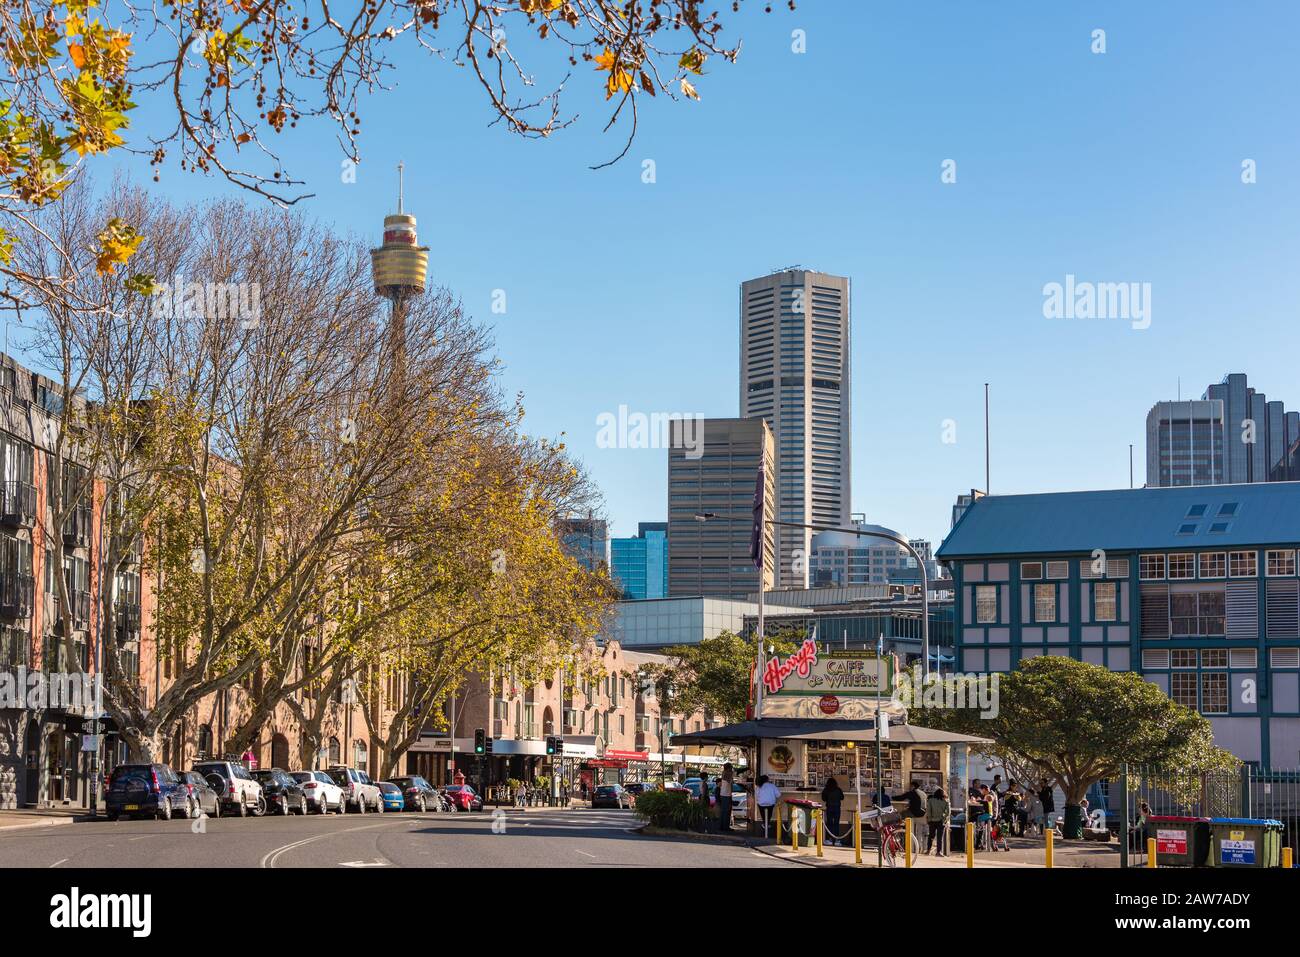 Sydney, Australia - July 03, 2016: Sydney streets with view of CBD, Woolloomooloo district Stock Photo